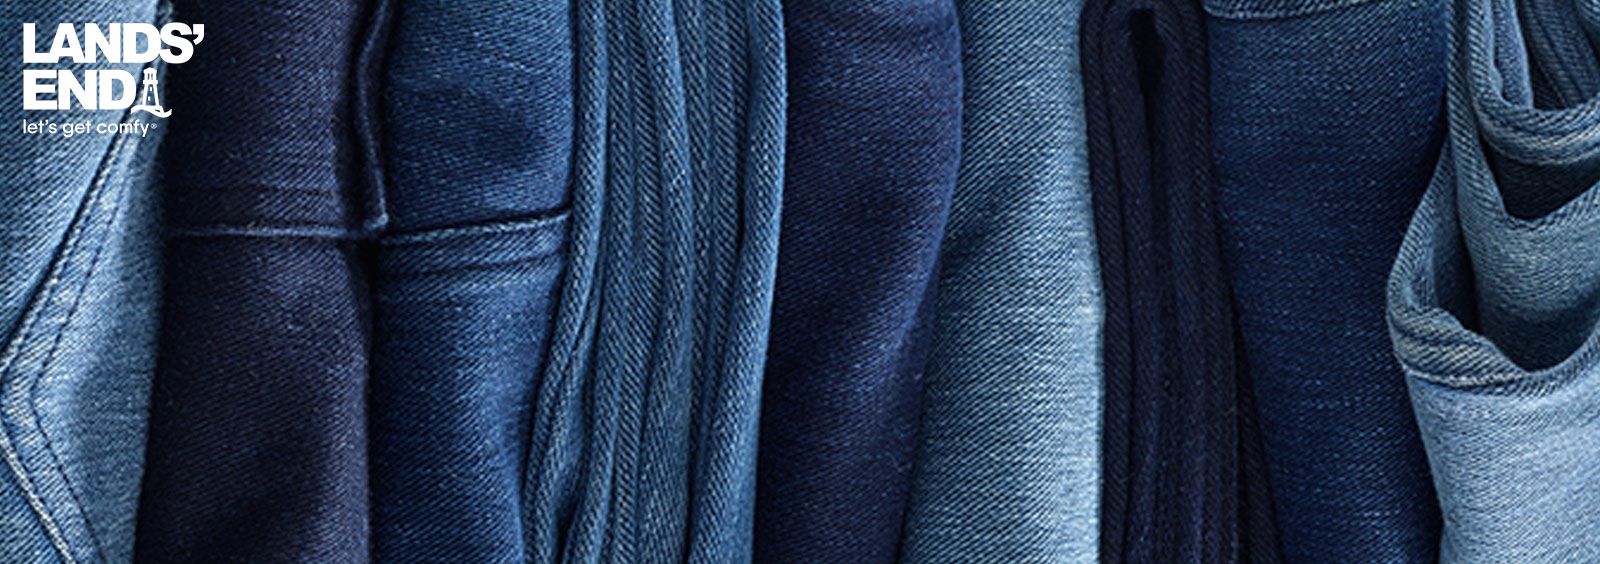 4 Steps to Securing the Perfect Fitting Jeans